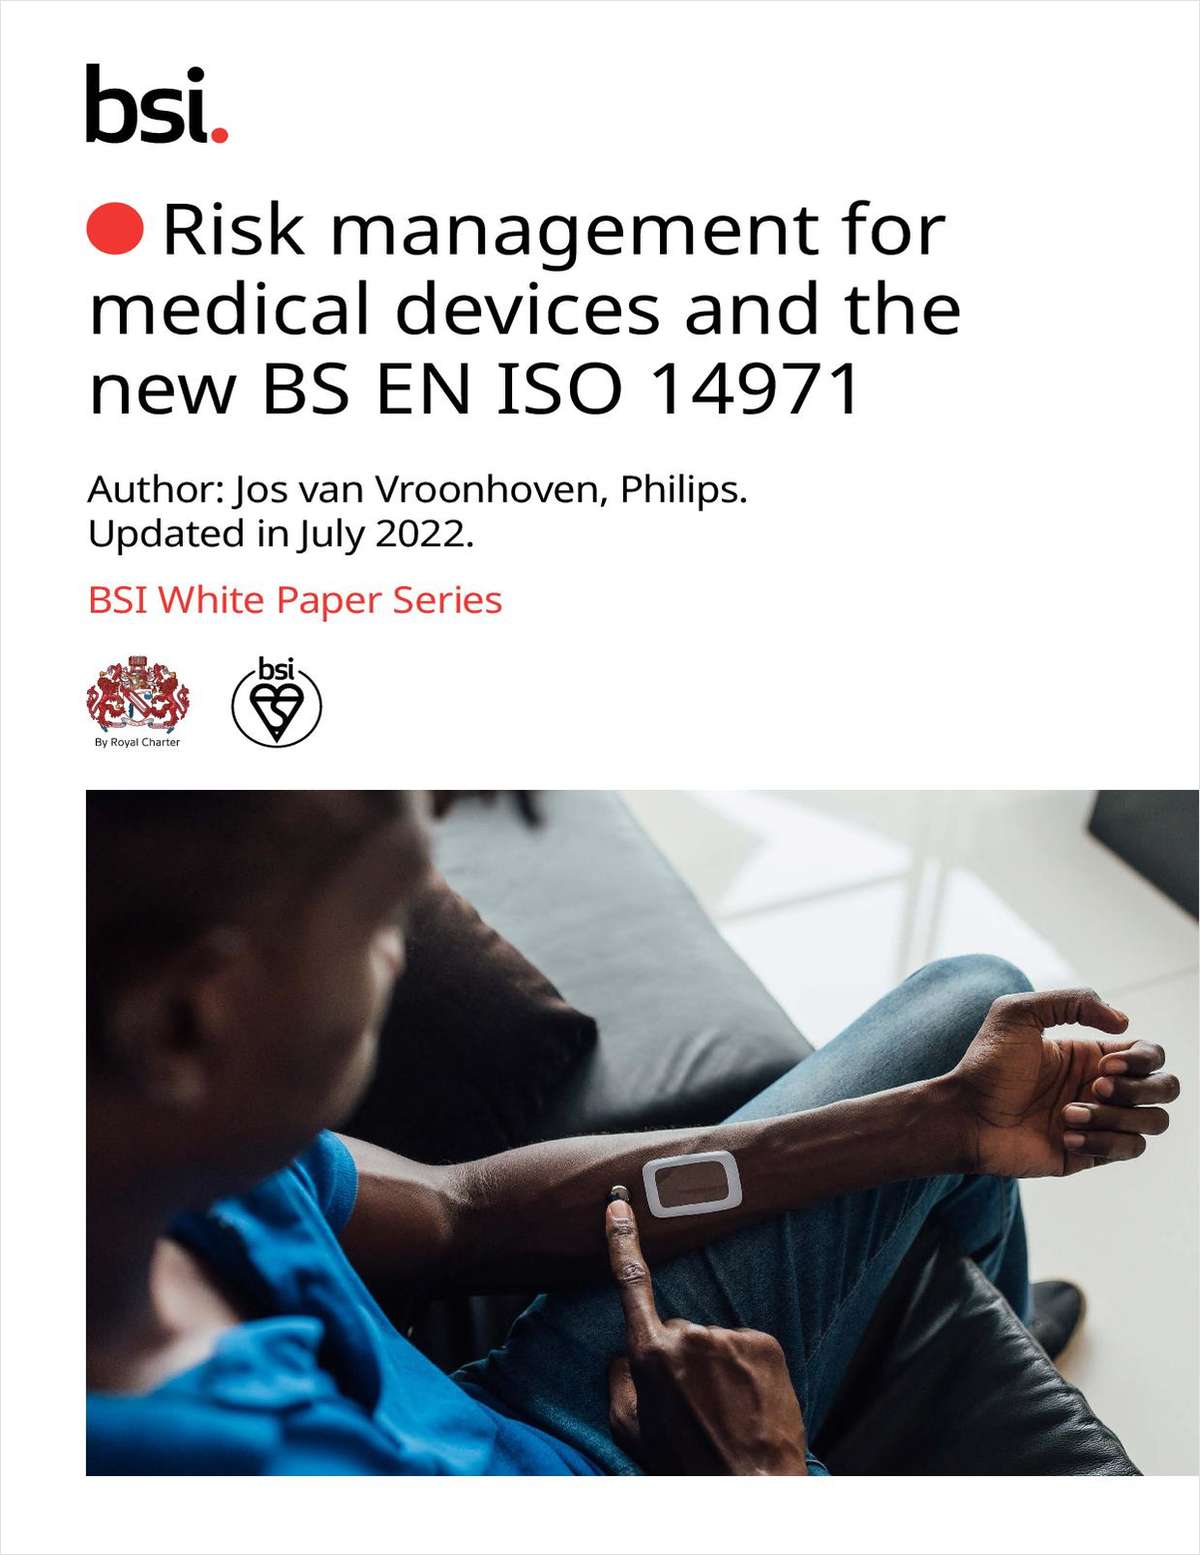 Risk management for medical devices and the updated BS EN ISO 14971